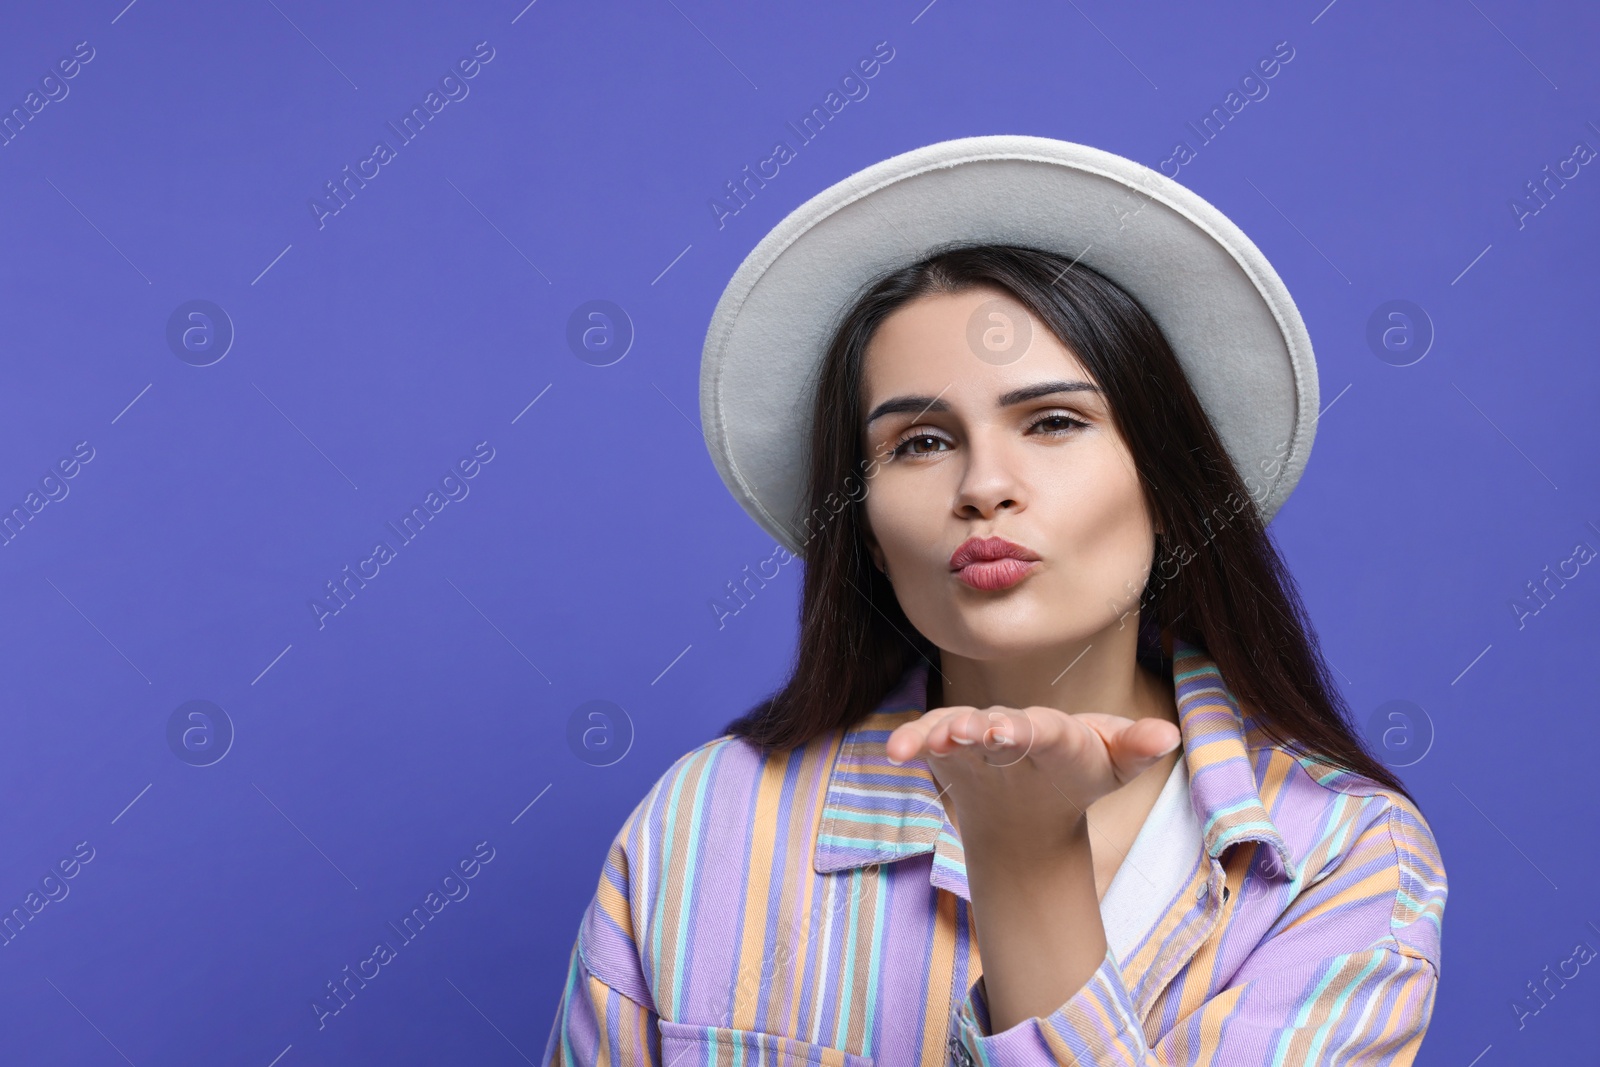 Photo of Beautiful young woman with stylish hat blowing kiss on purple background. Space for text